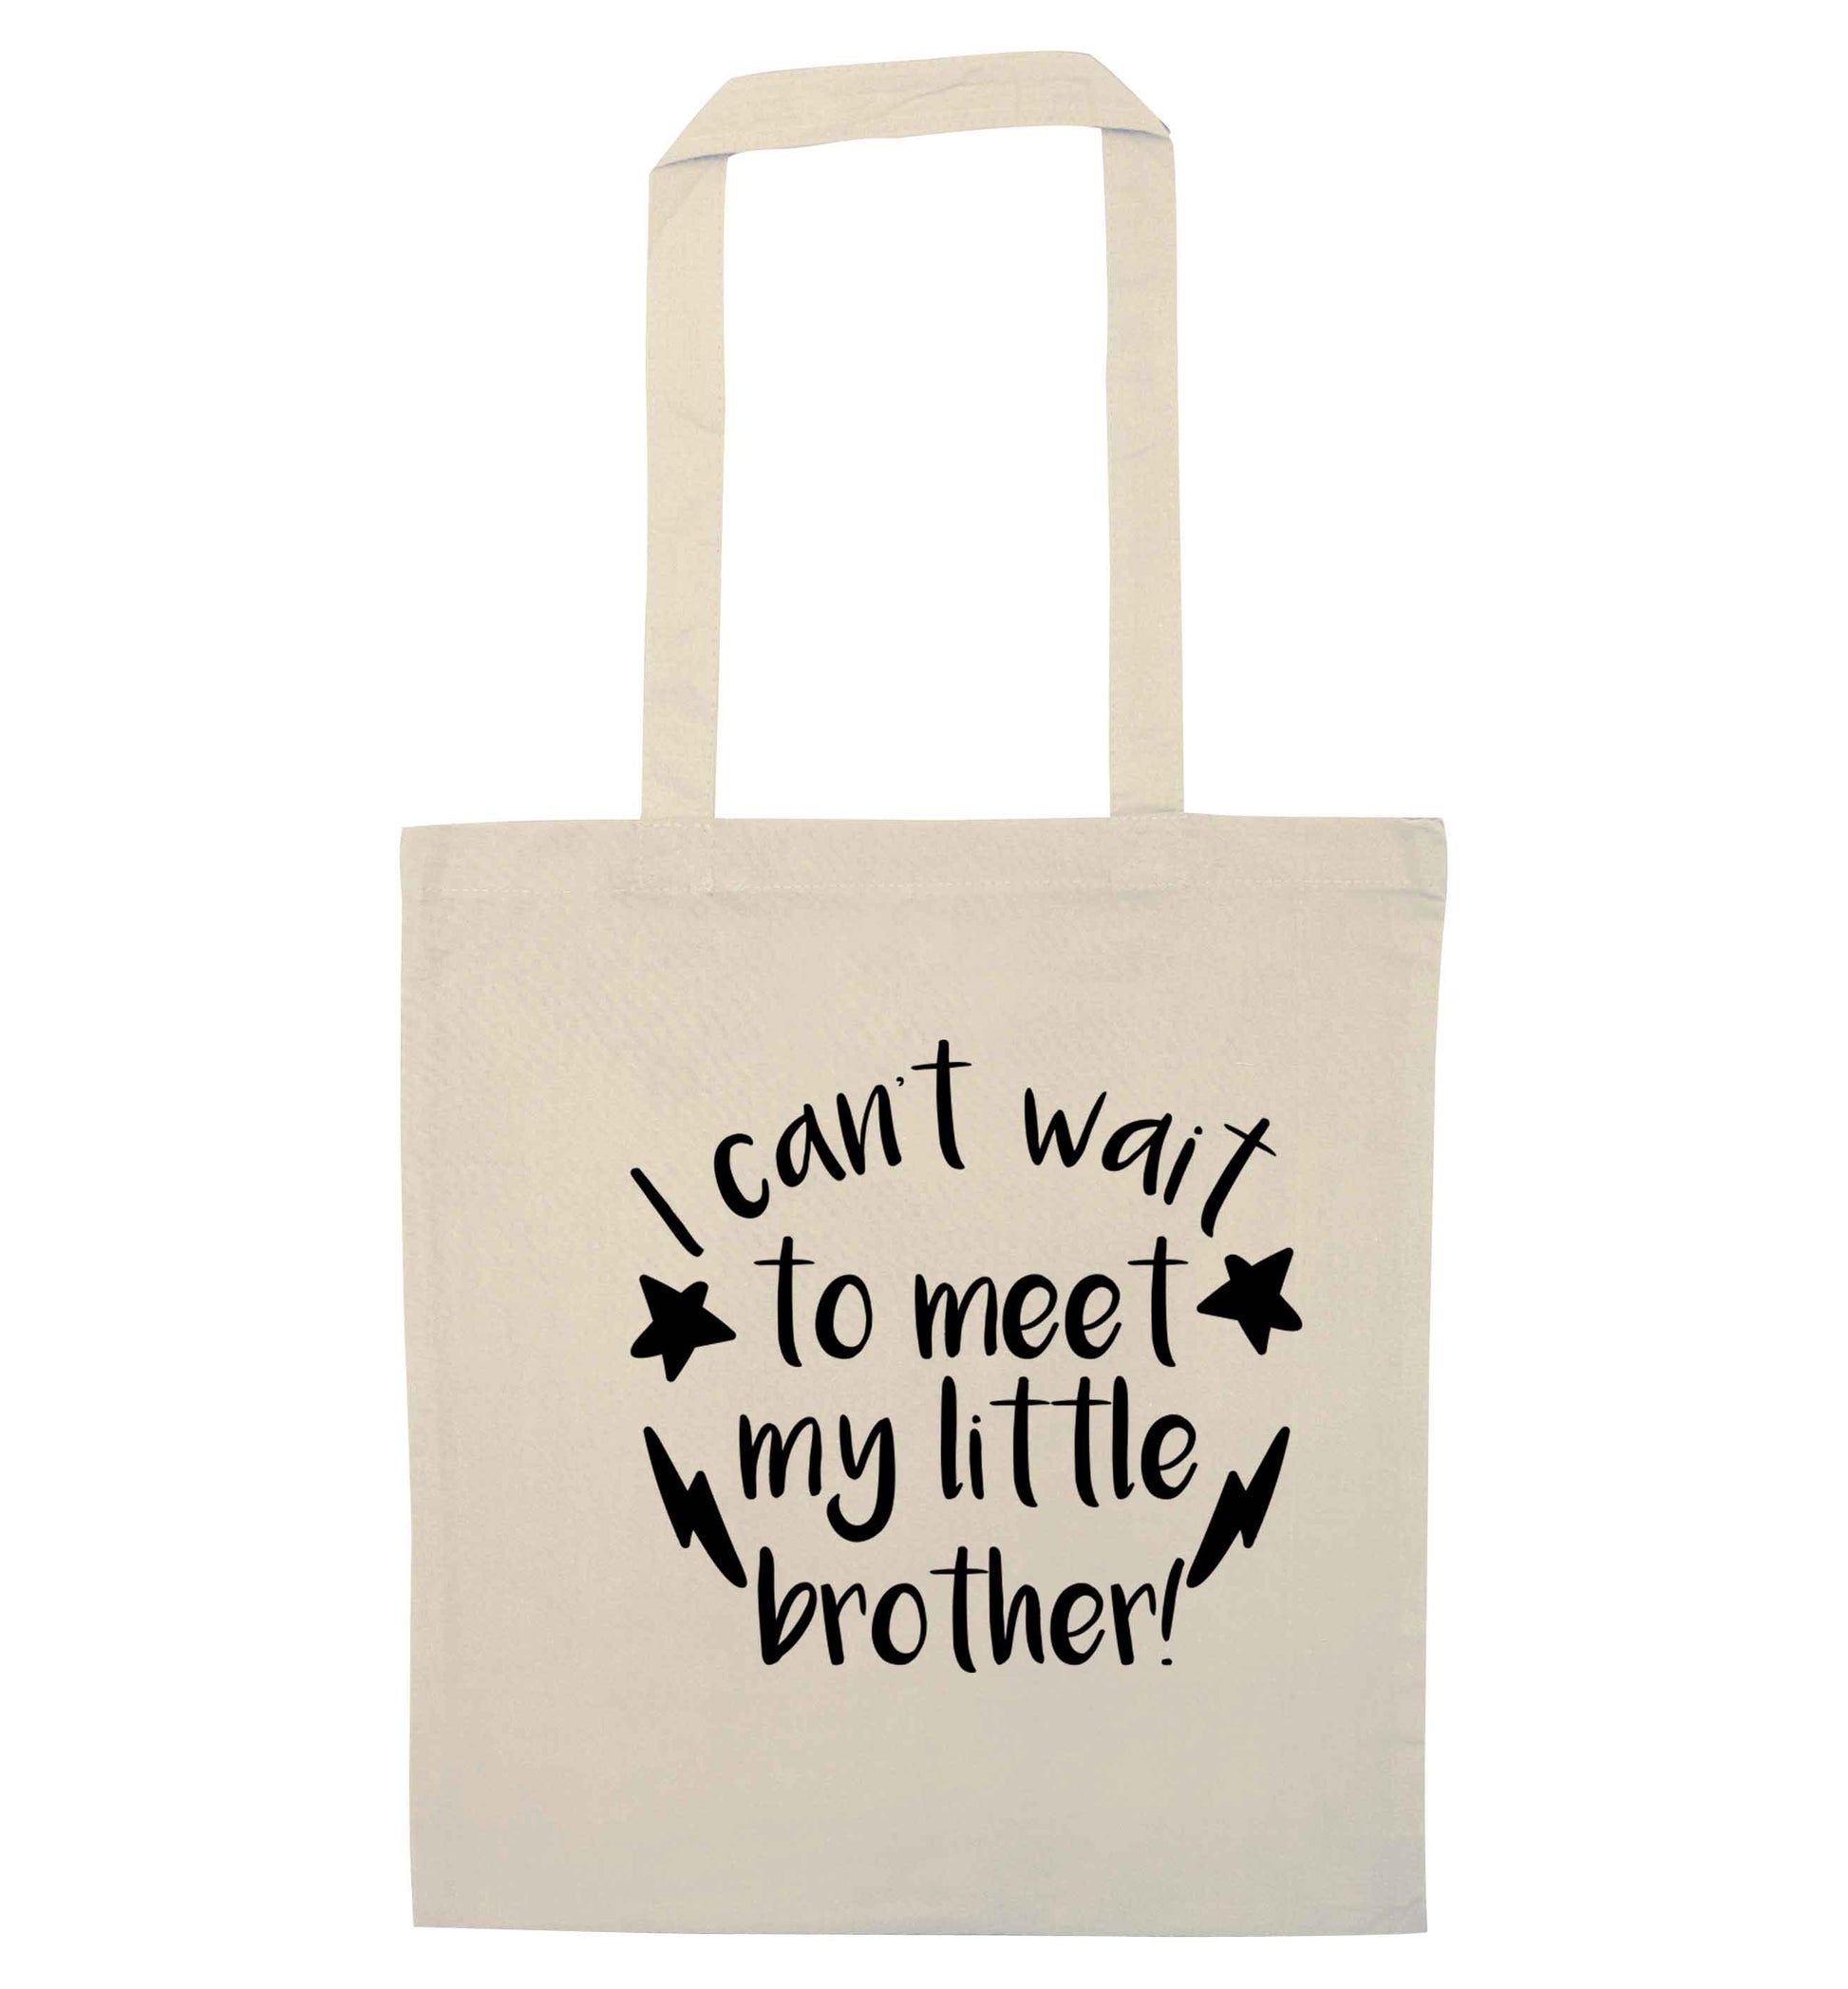 I can't wait to meet my sister! natural tote bag